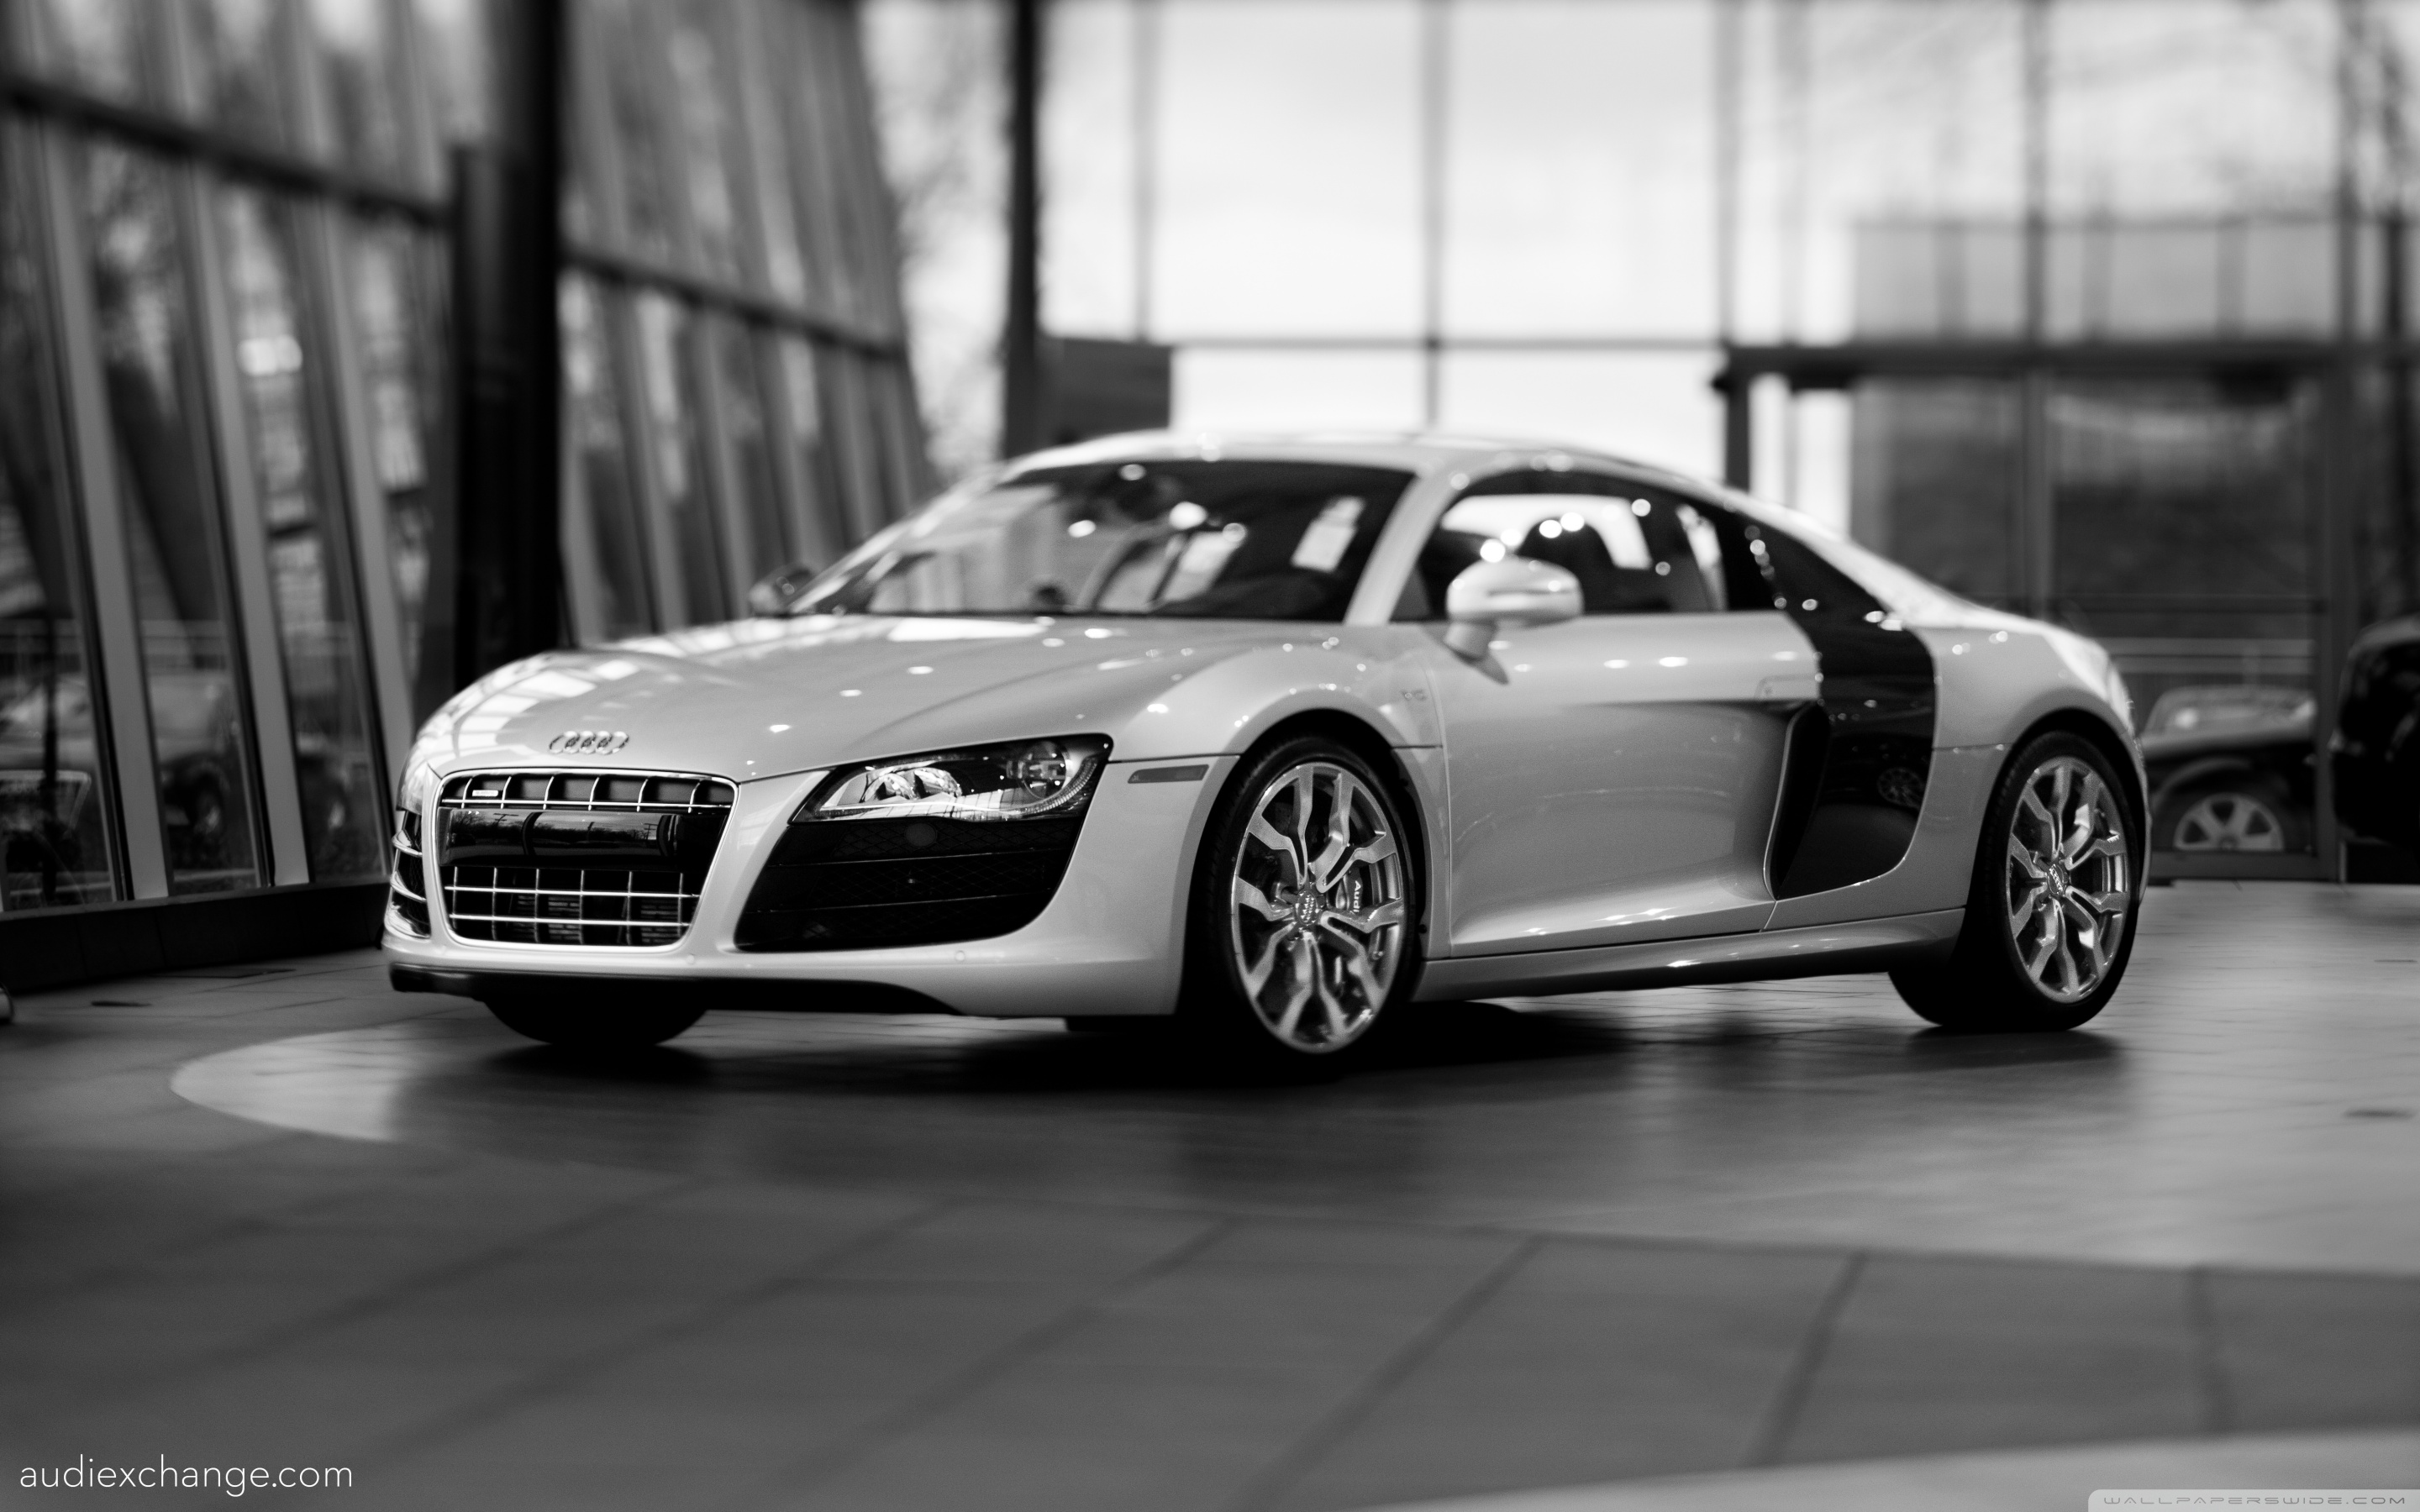 Audi R8 V10 Fsi In The Exchange Showroom Photographed